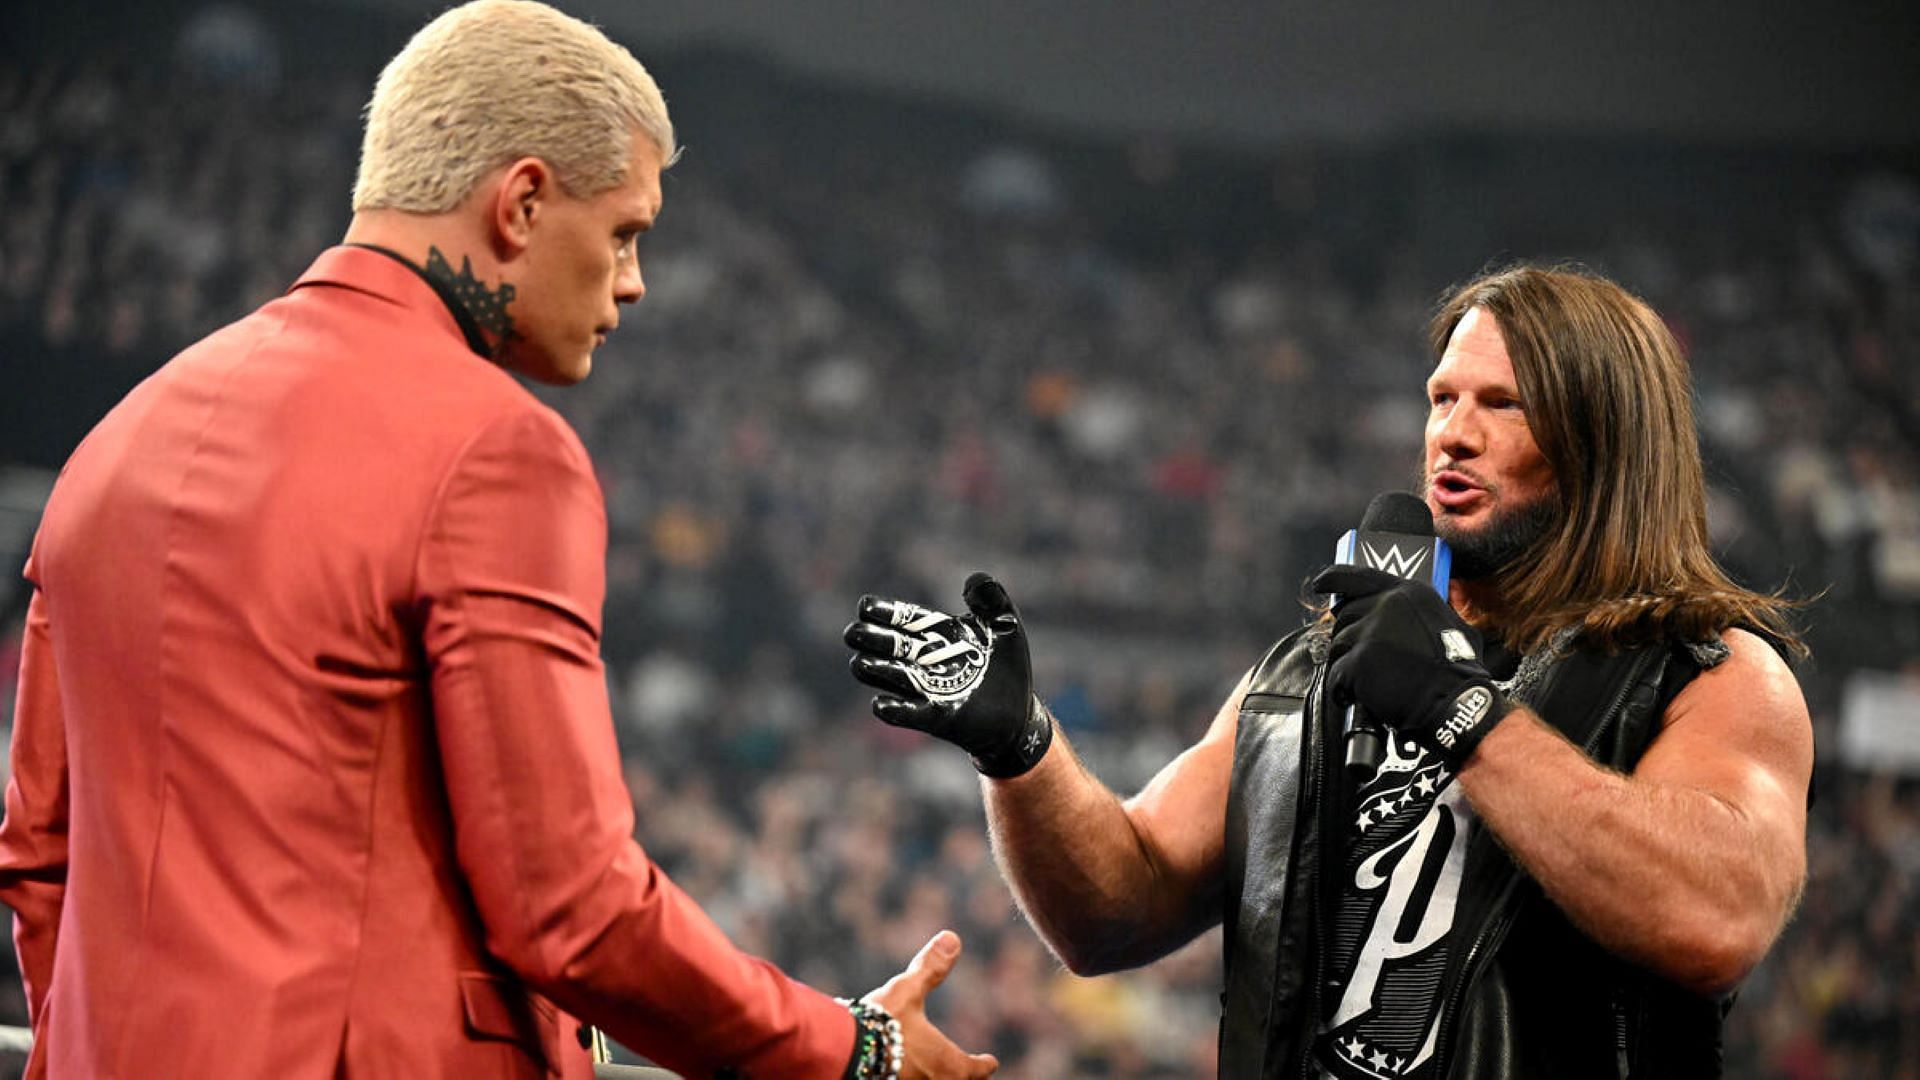 Will things be cordial at Backlash France between AJ Styles and Cody Rhodes?